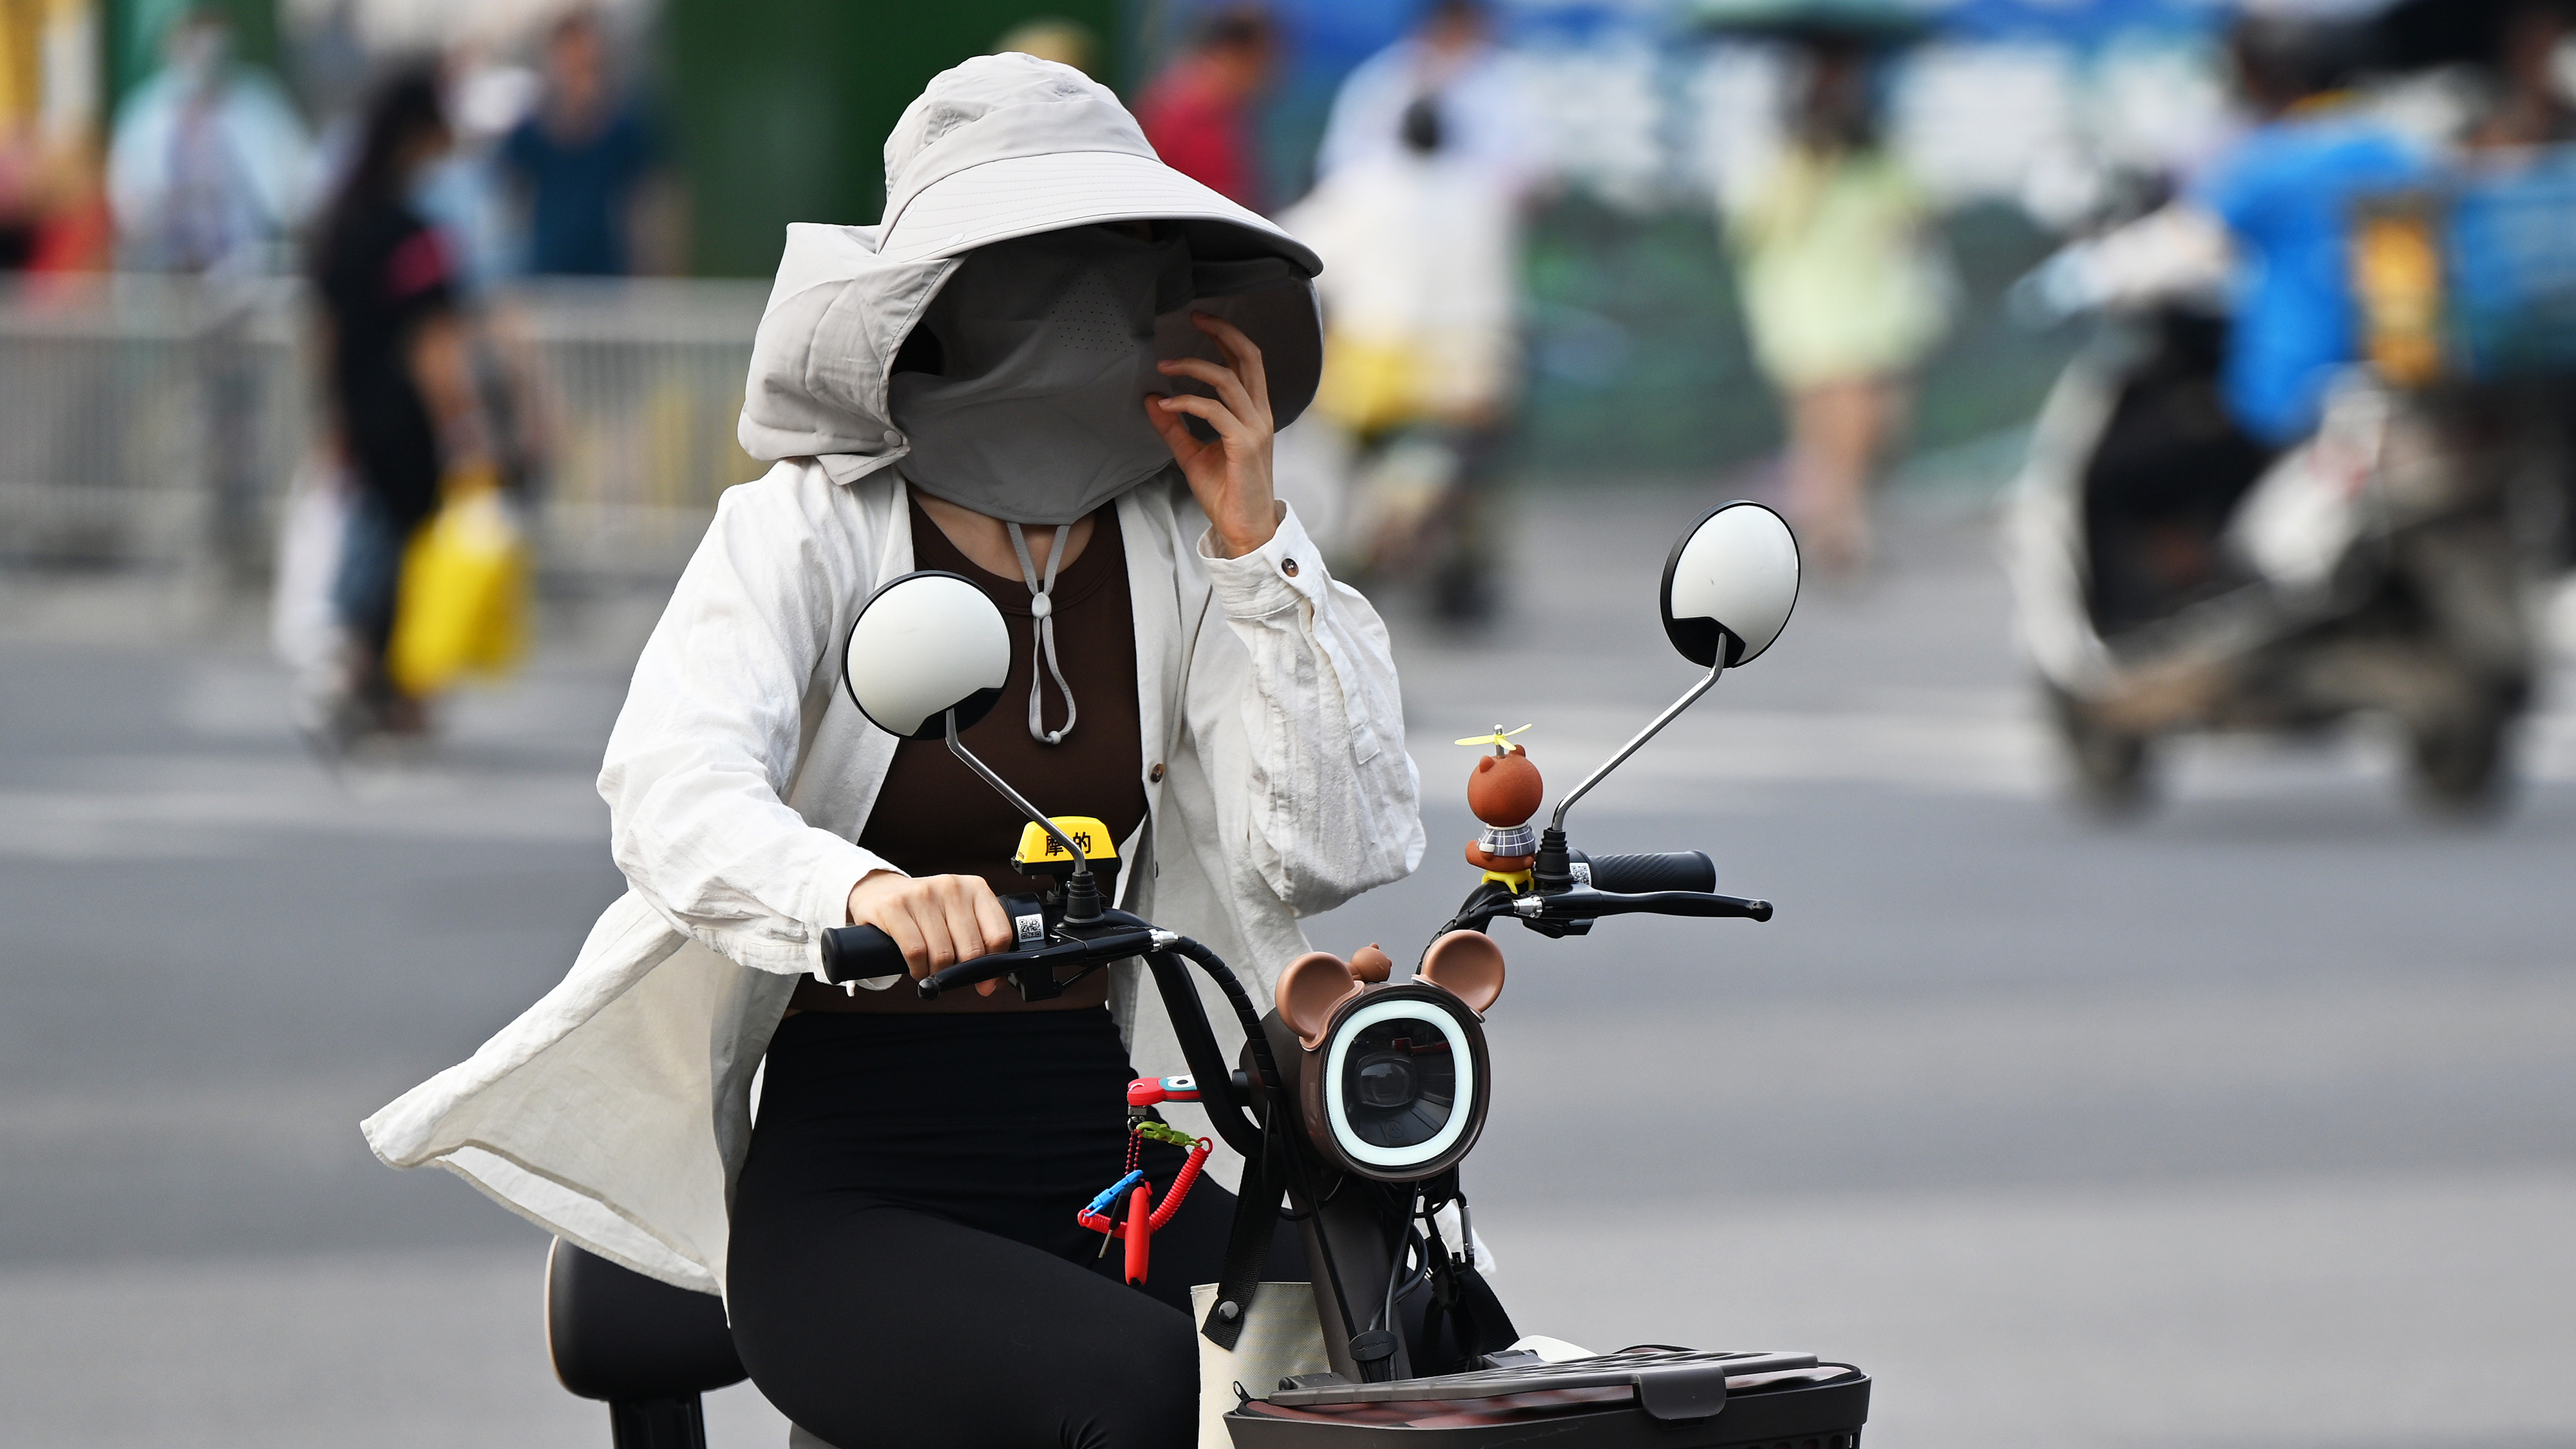 A woman wearing sun protection clothing rides an electric bike during the hot weather in Chengdu, southwest China's Sichuan Province, May 30, 2023. /CFP